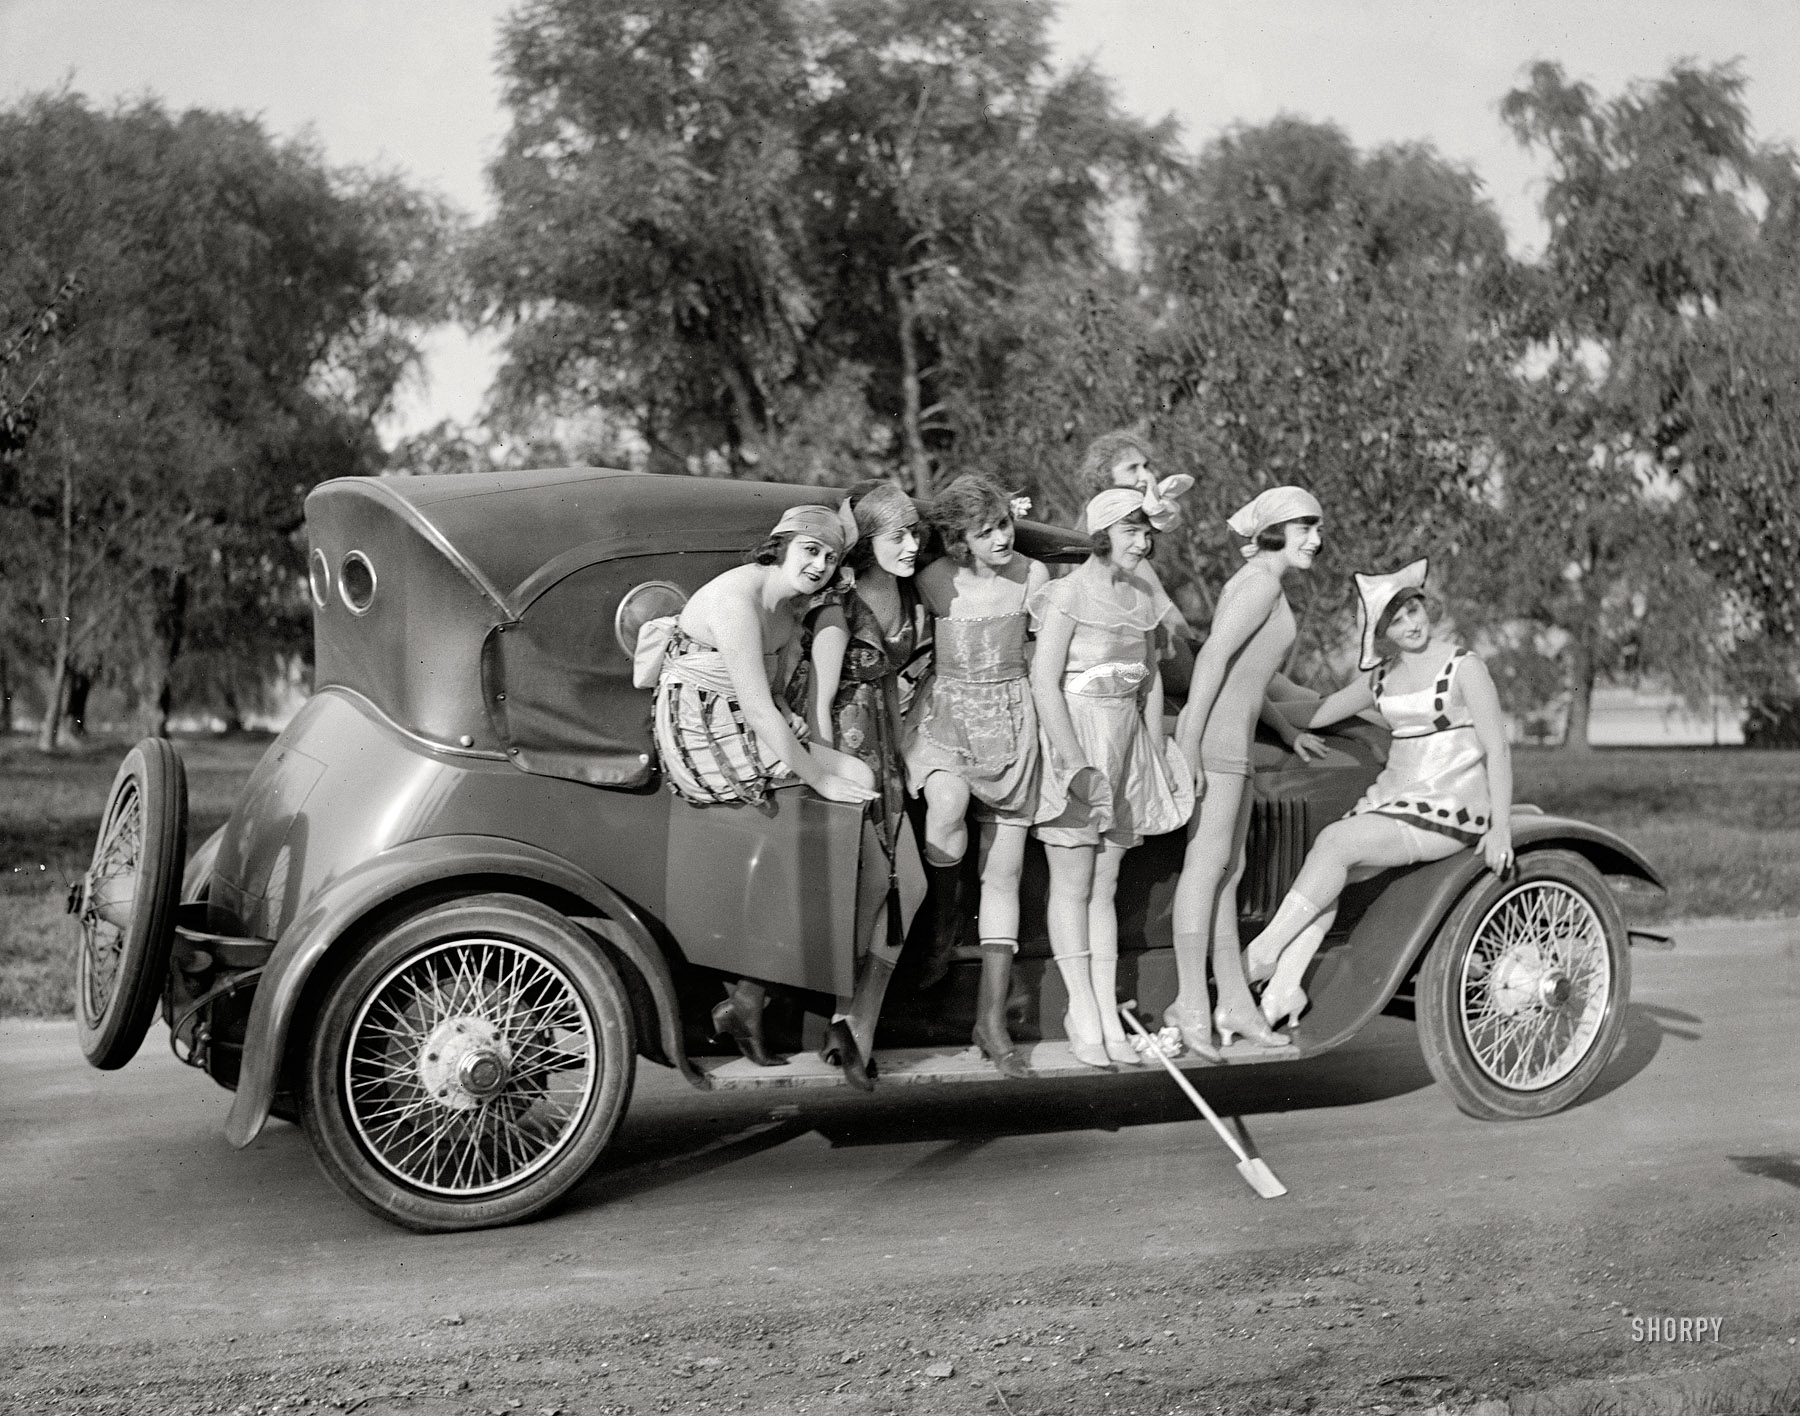 Washington, D.C., 1919. "Mack Sennett girls." Producer Mack Sennett's comedy reels featured a bevy of "bathing beauties," among them Marvel Rea, seen here in the harlequin costume. More on these ladies here. | View full size.